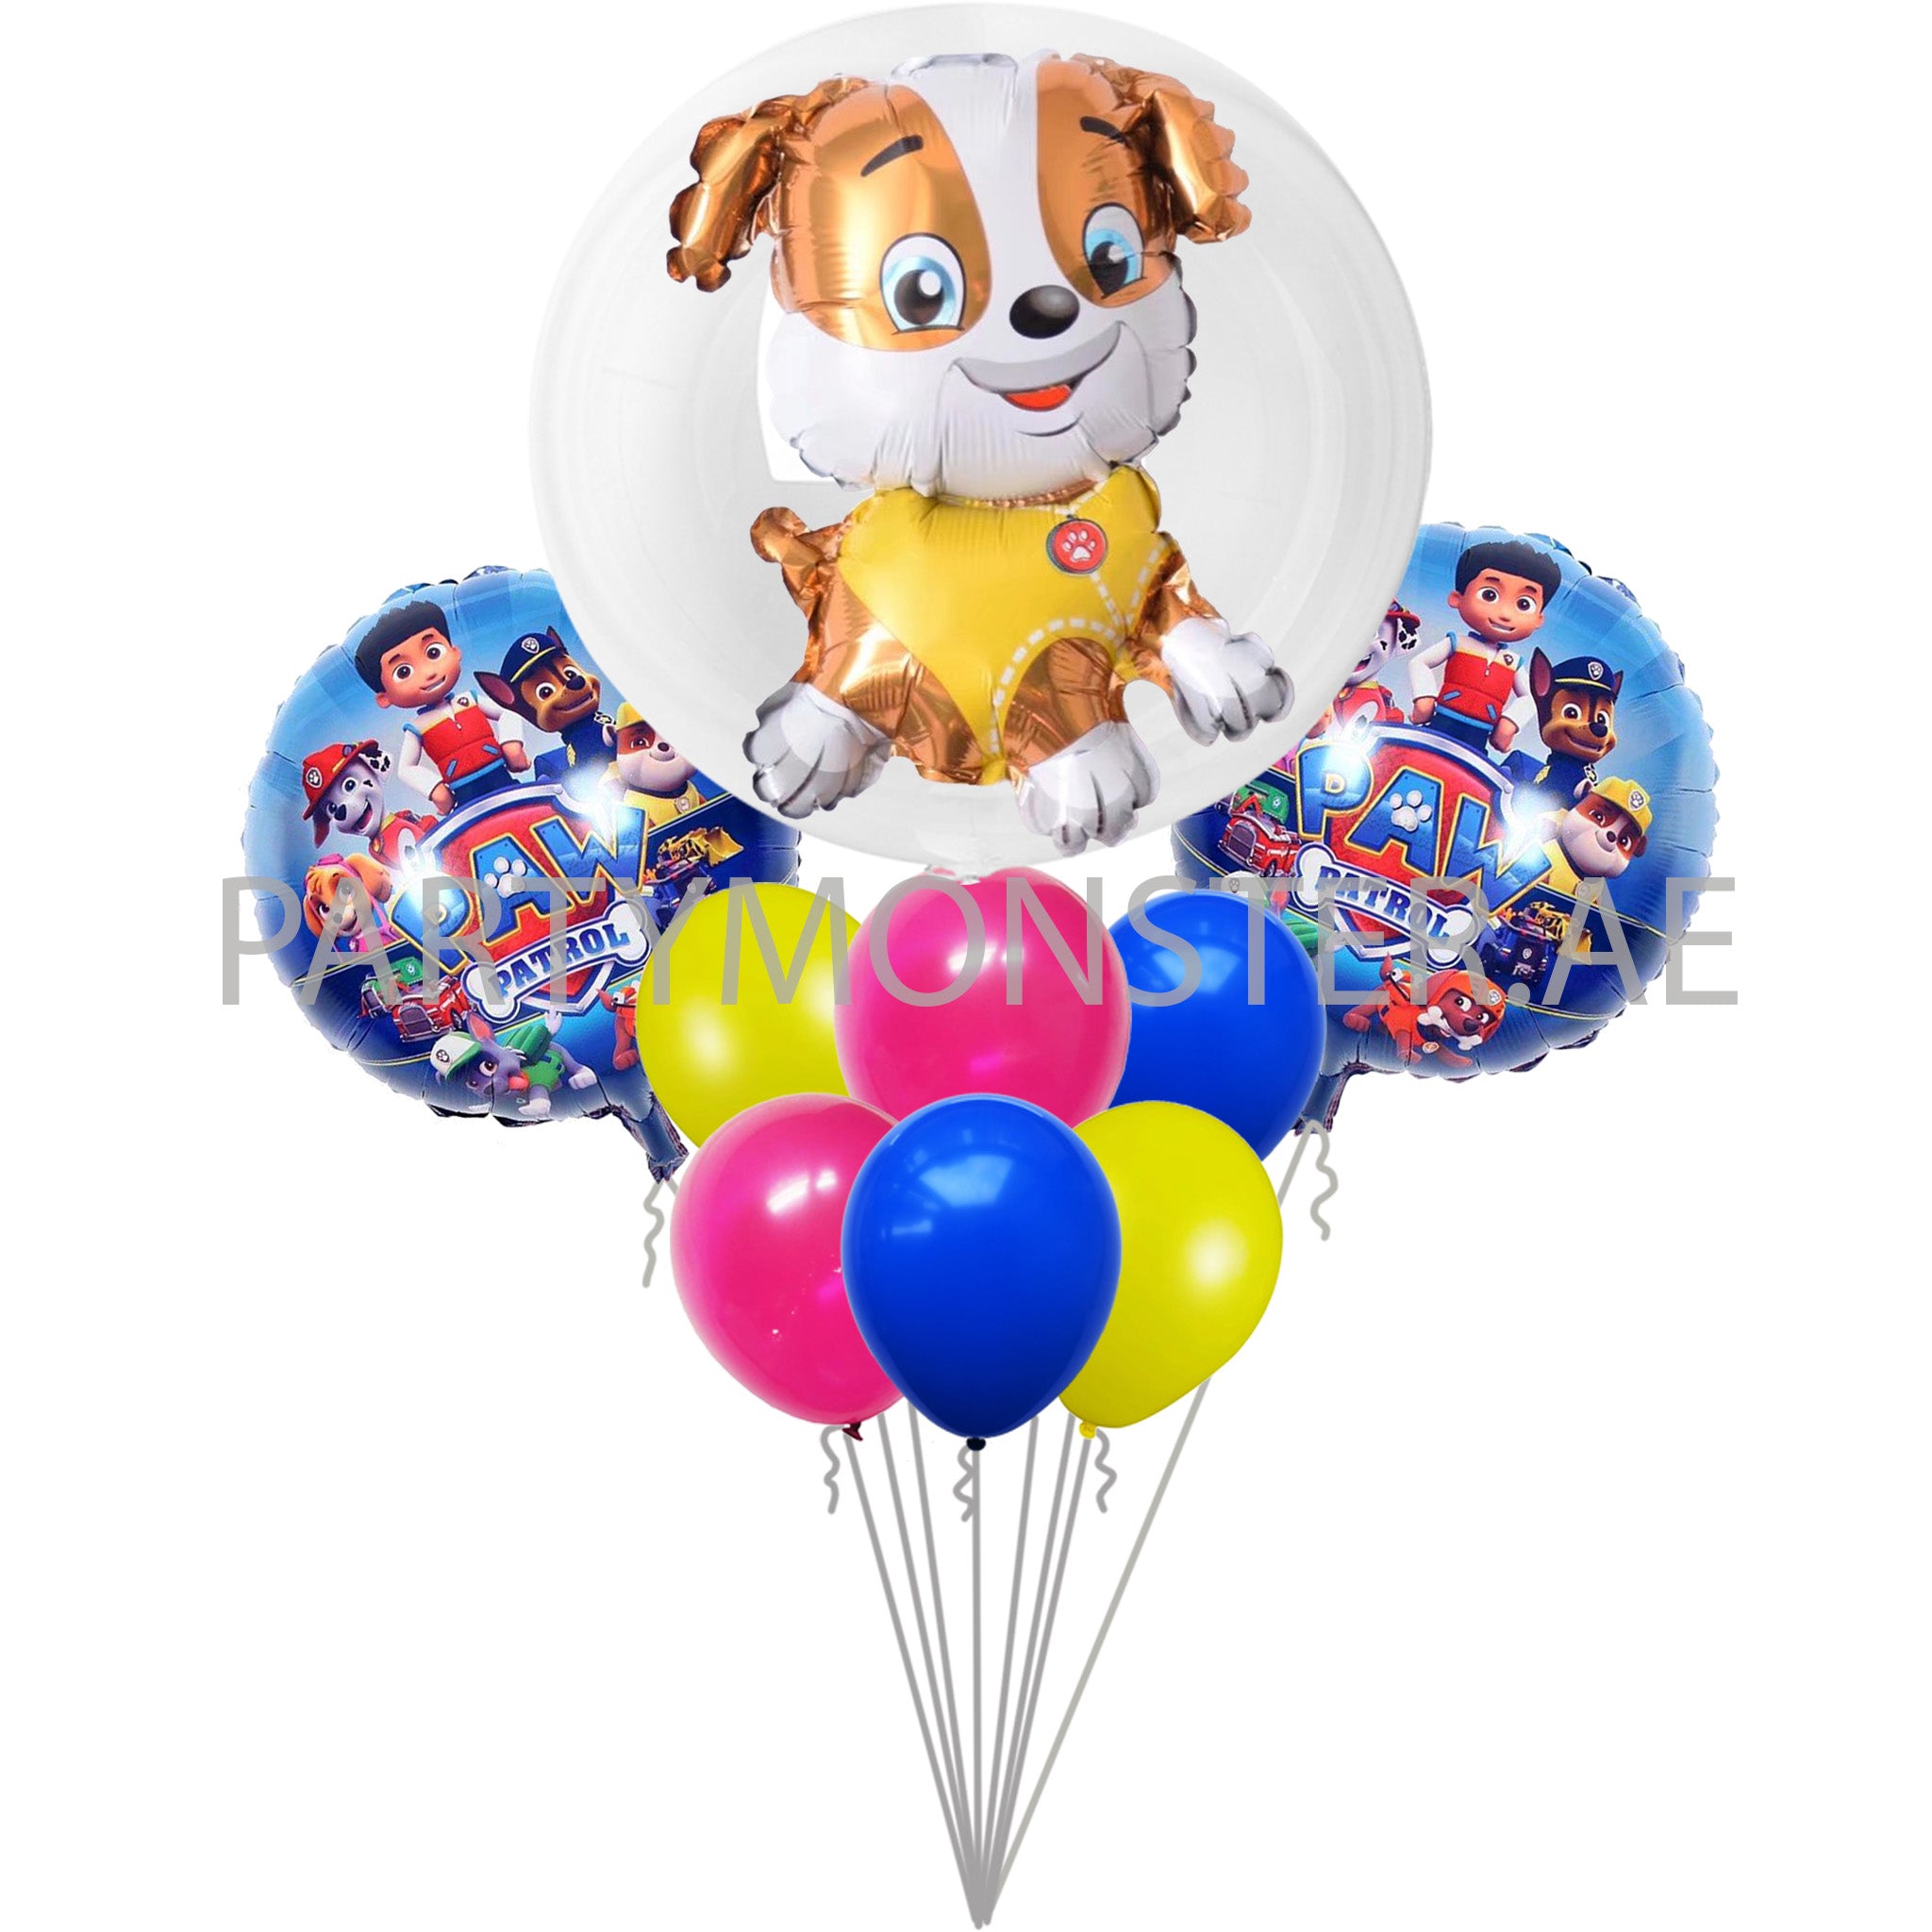 Paw Patrol Mixed Balloons Bouquet delivery in Dubai